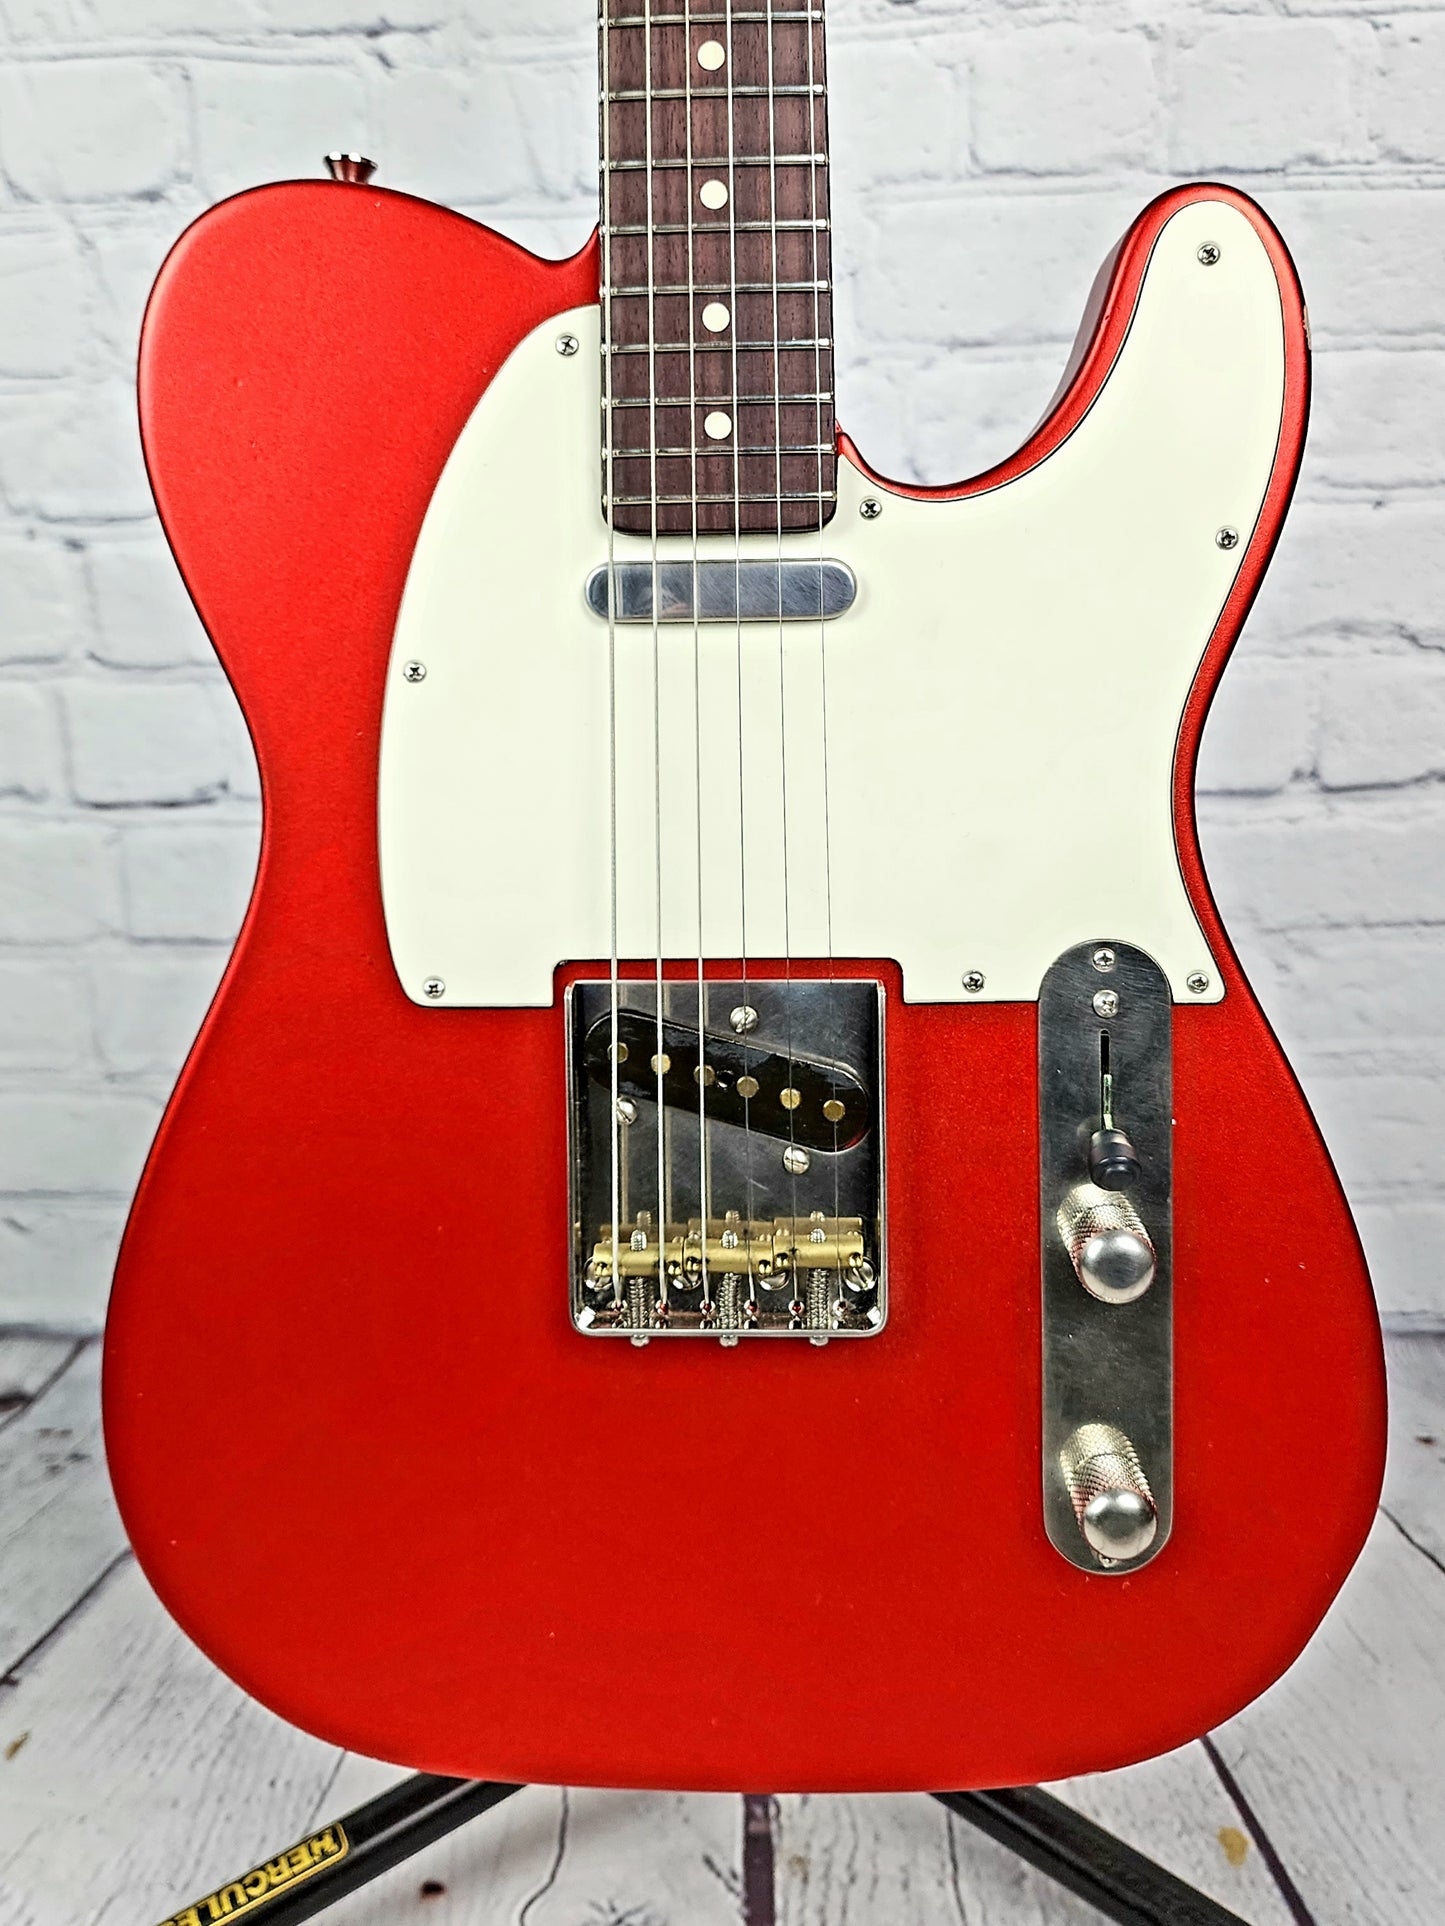 LSL Instruments Tbone One Electric Guitar Candy Apple Red Flame Maple Neck